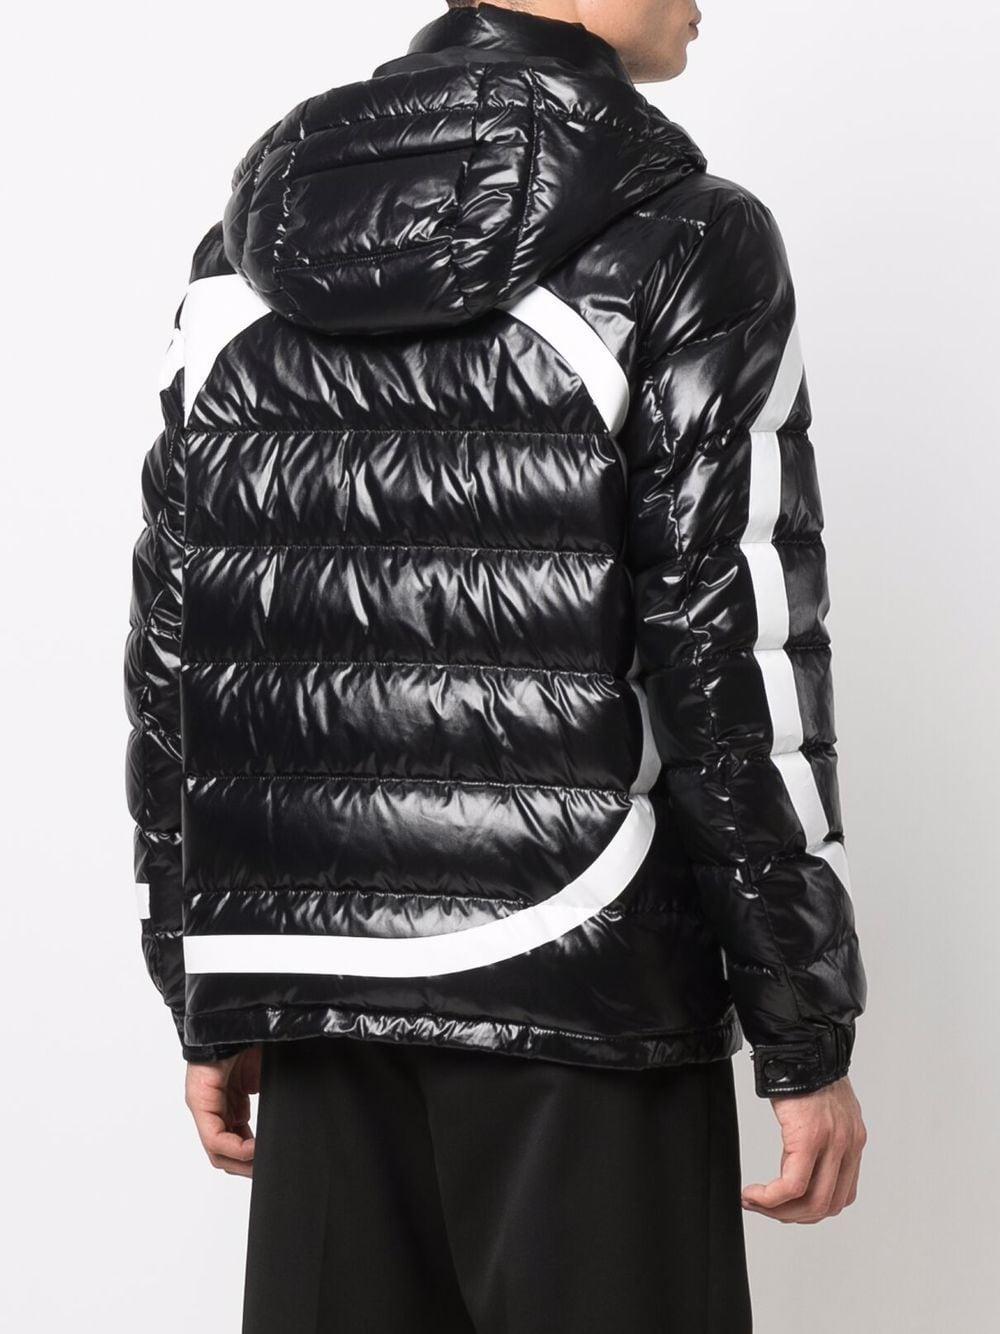 Valentino Printed Puffer Jacket in Nero (Black) for Men - Save 32 